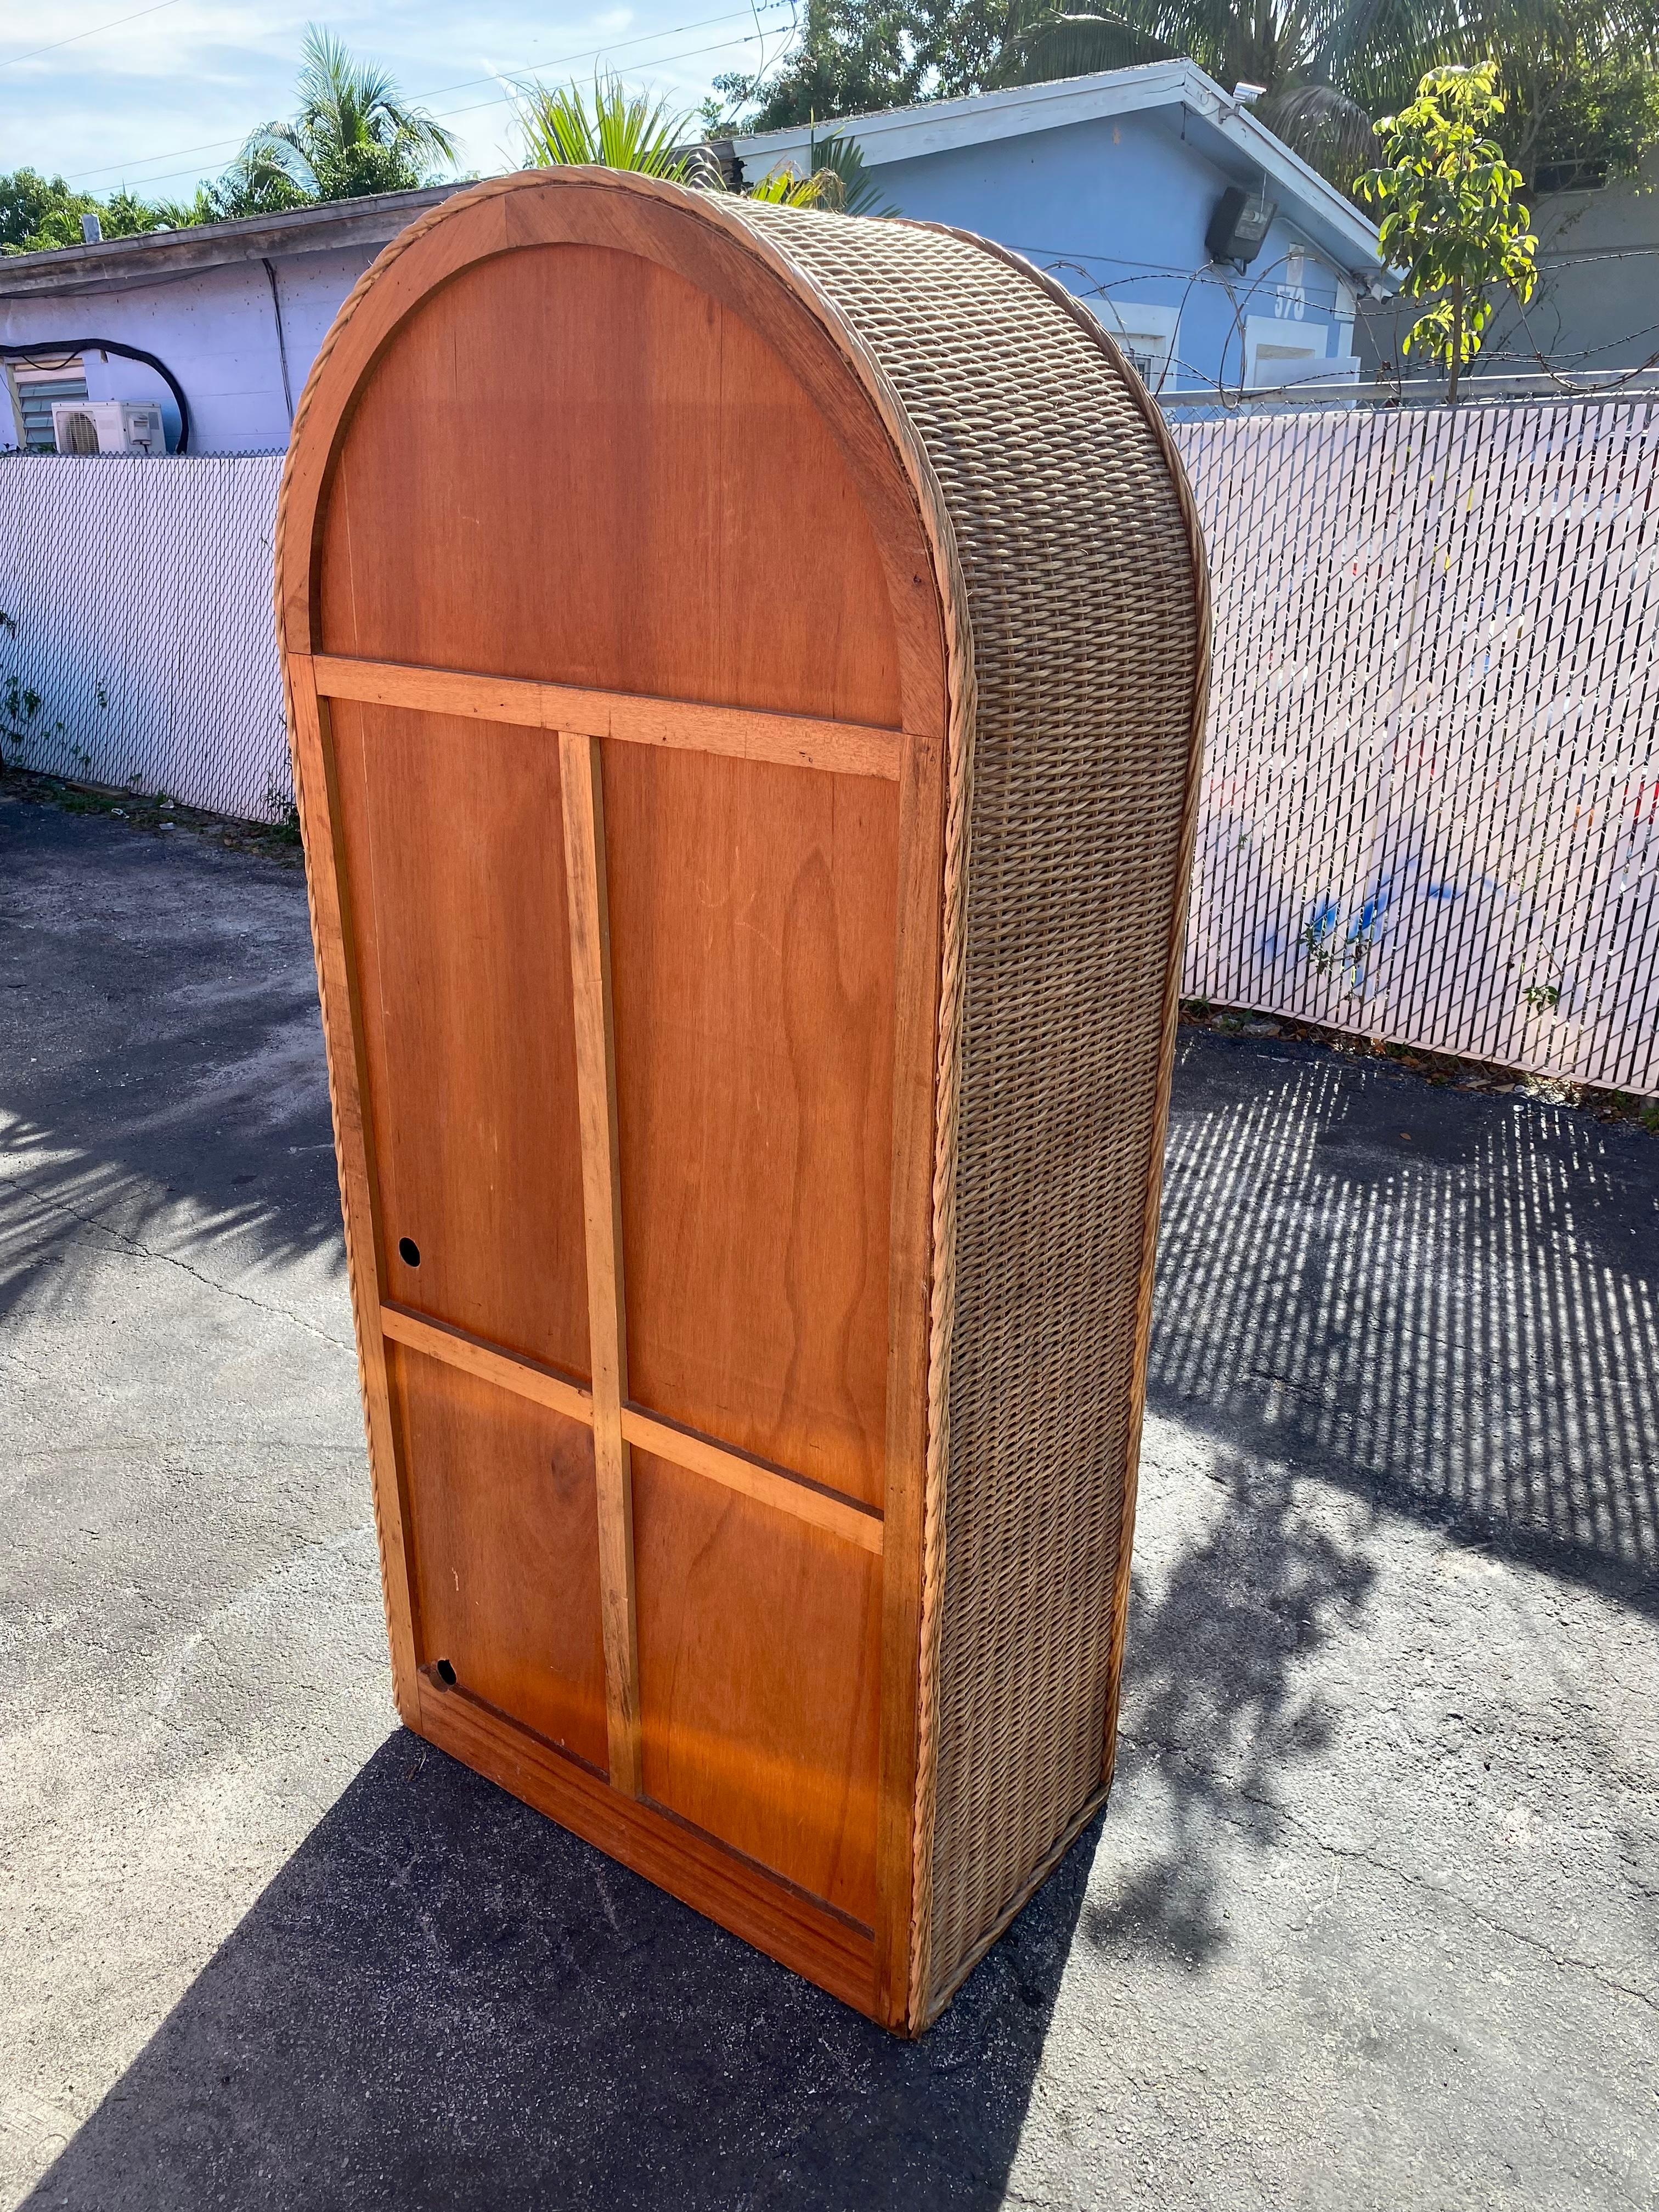 Late 20th Century 1970s Rattan Arch Armoire Wardrobe Storage Cabinet For Sale